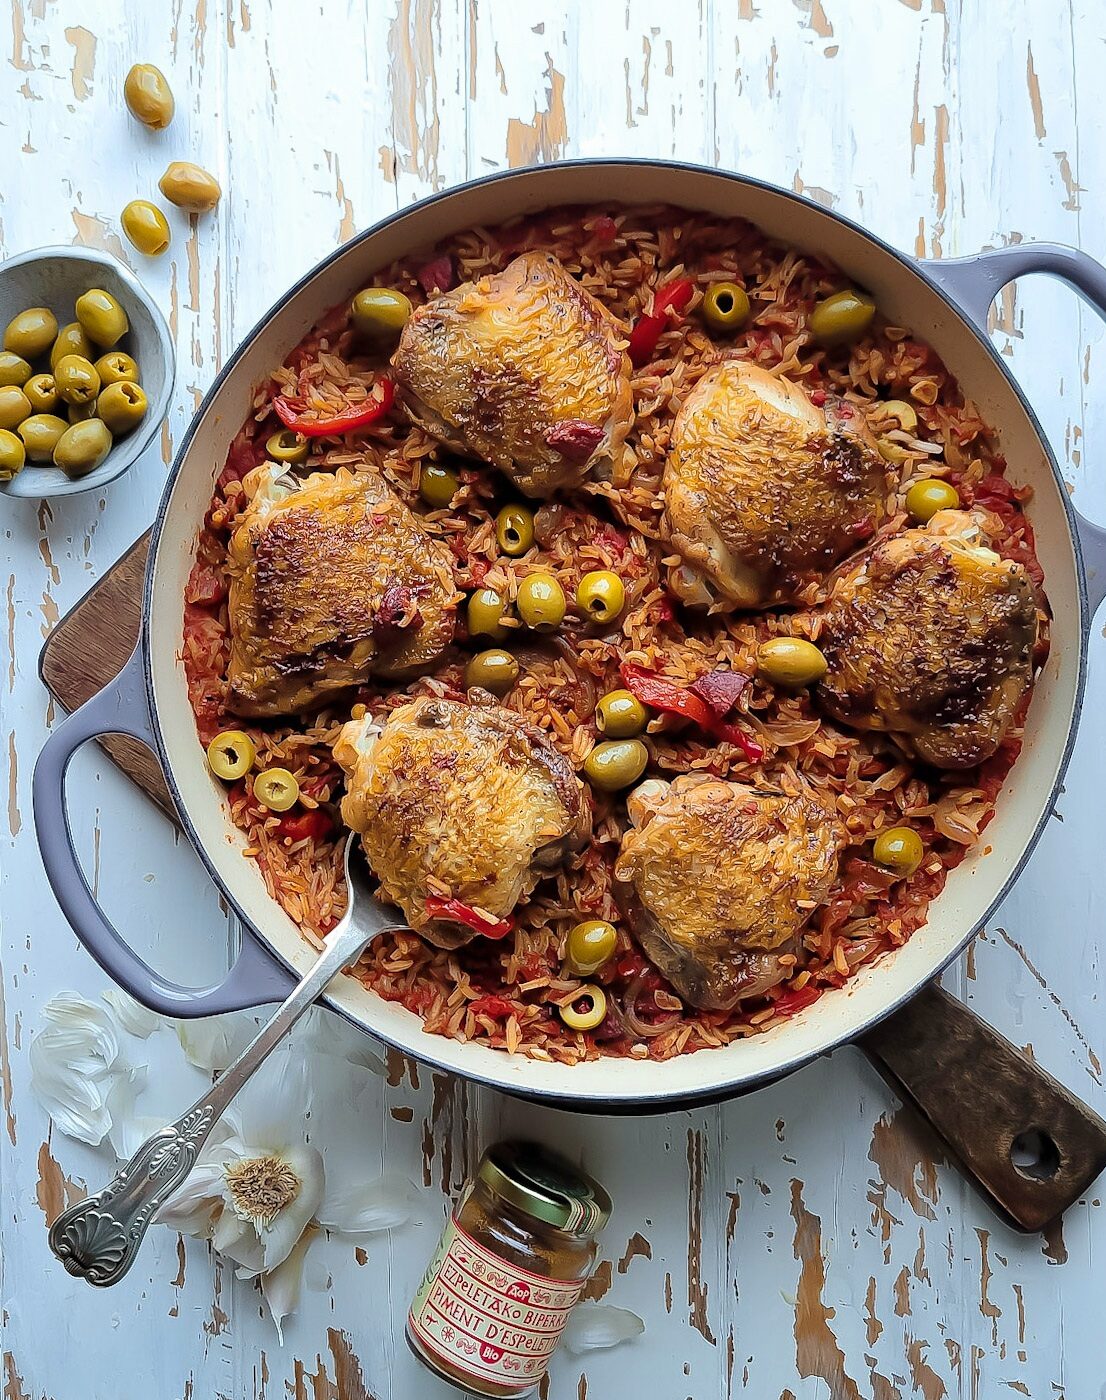 A skillet sitting on a cutting board is filled with spiced rice and chicken thighs, along with roasted peppers, olives and chorizo sausage. a bowl of olives and garlic cloves are scattered around the cutting board.